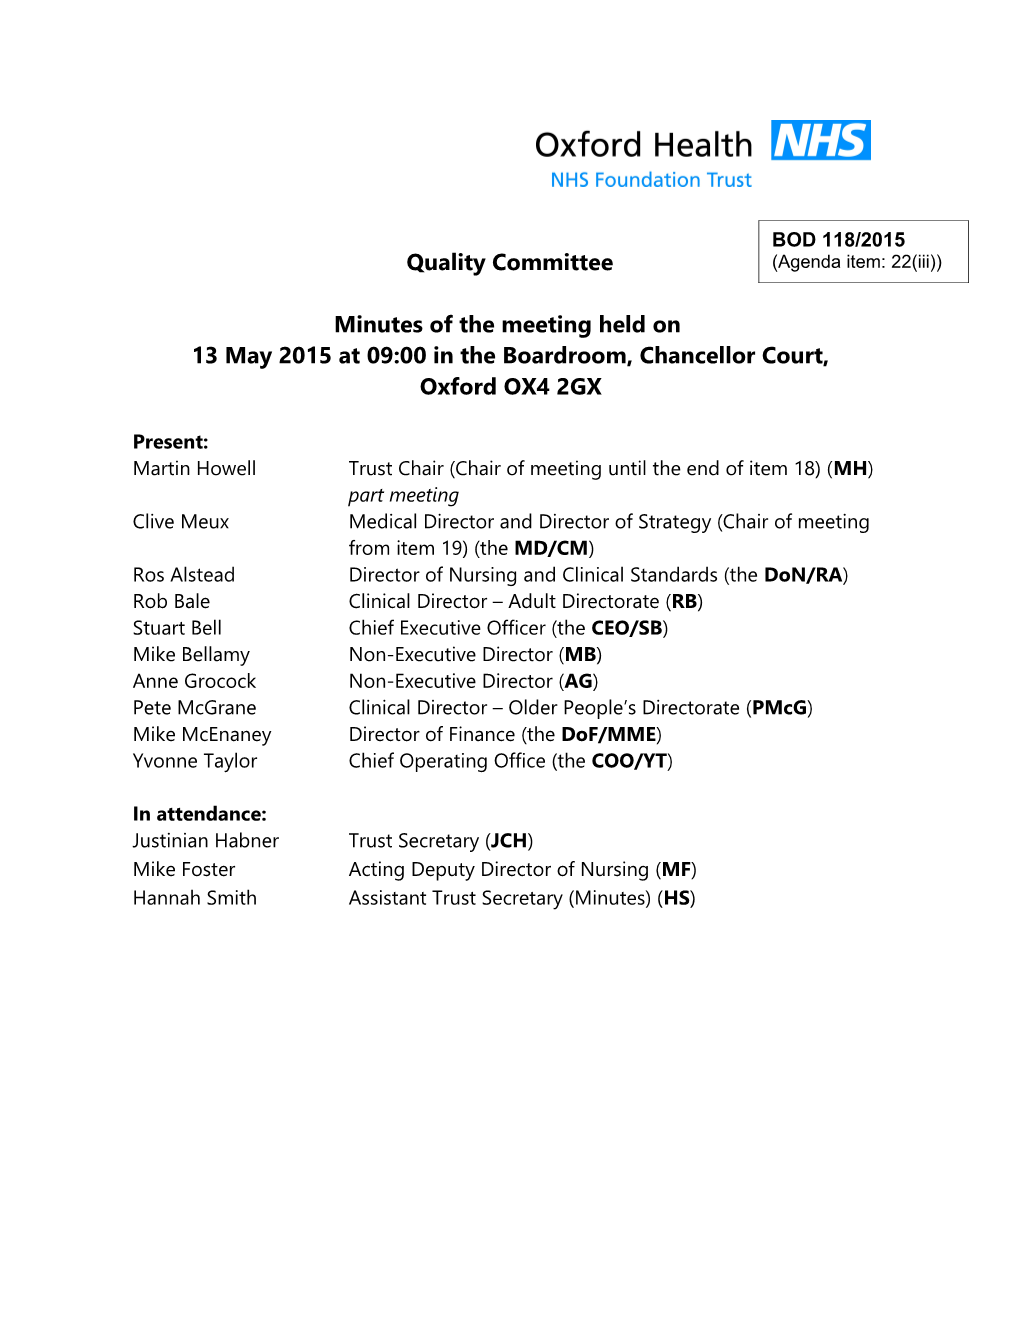 Minutes of the Quality Committee, 13 May 2015